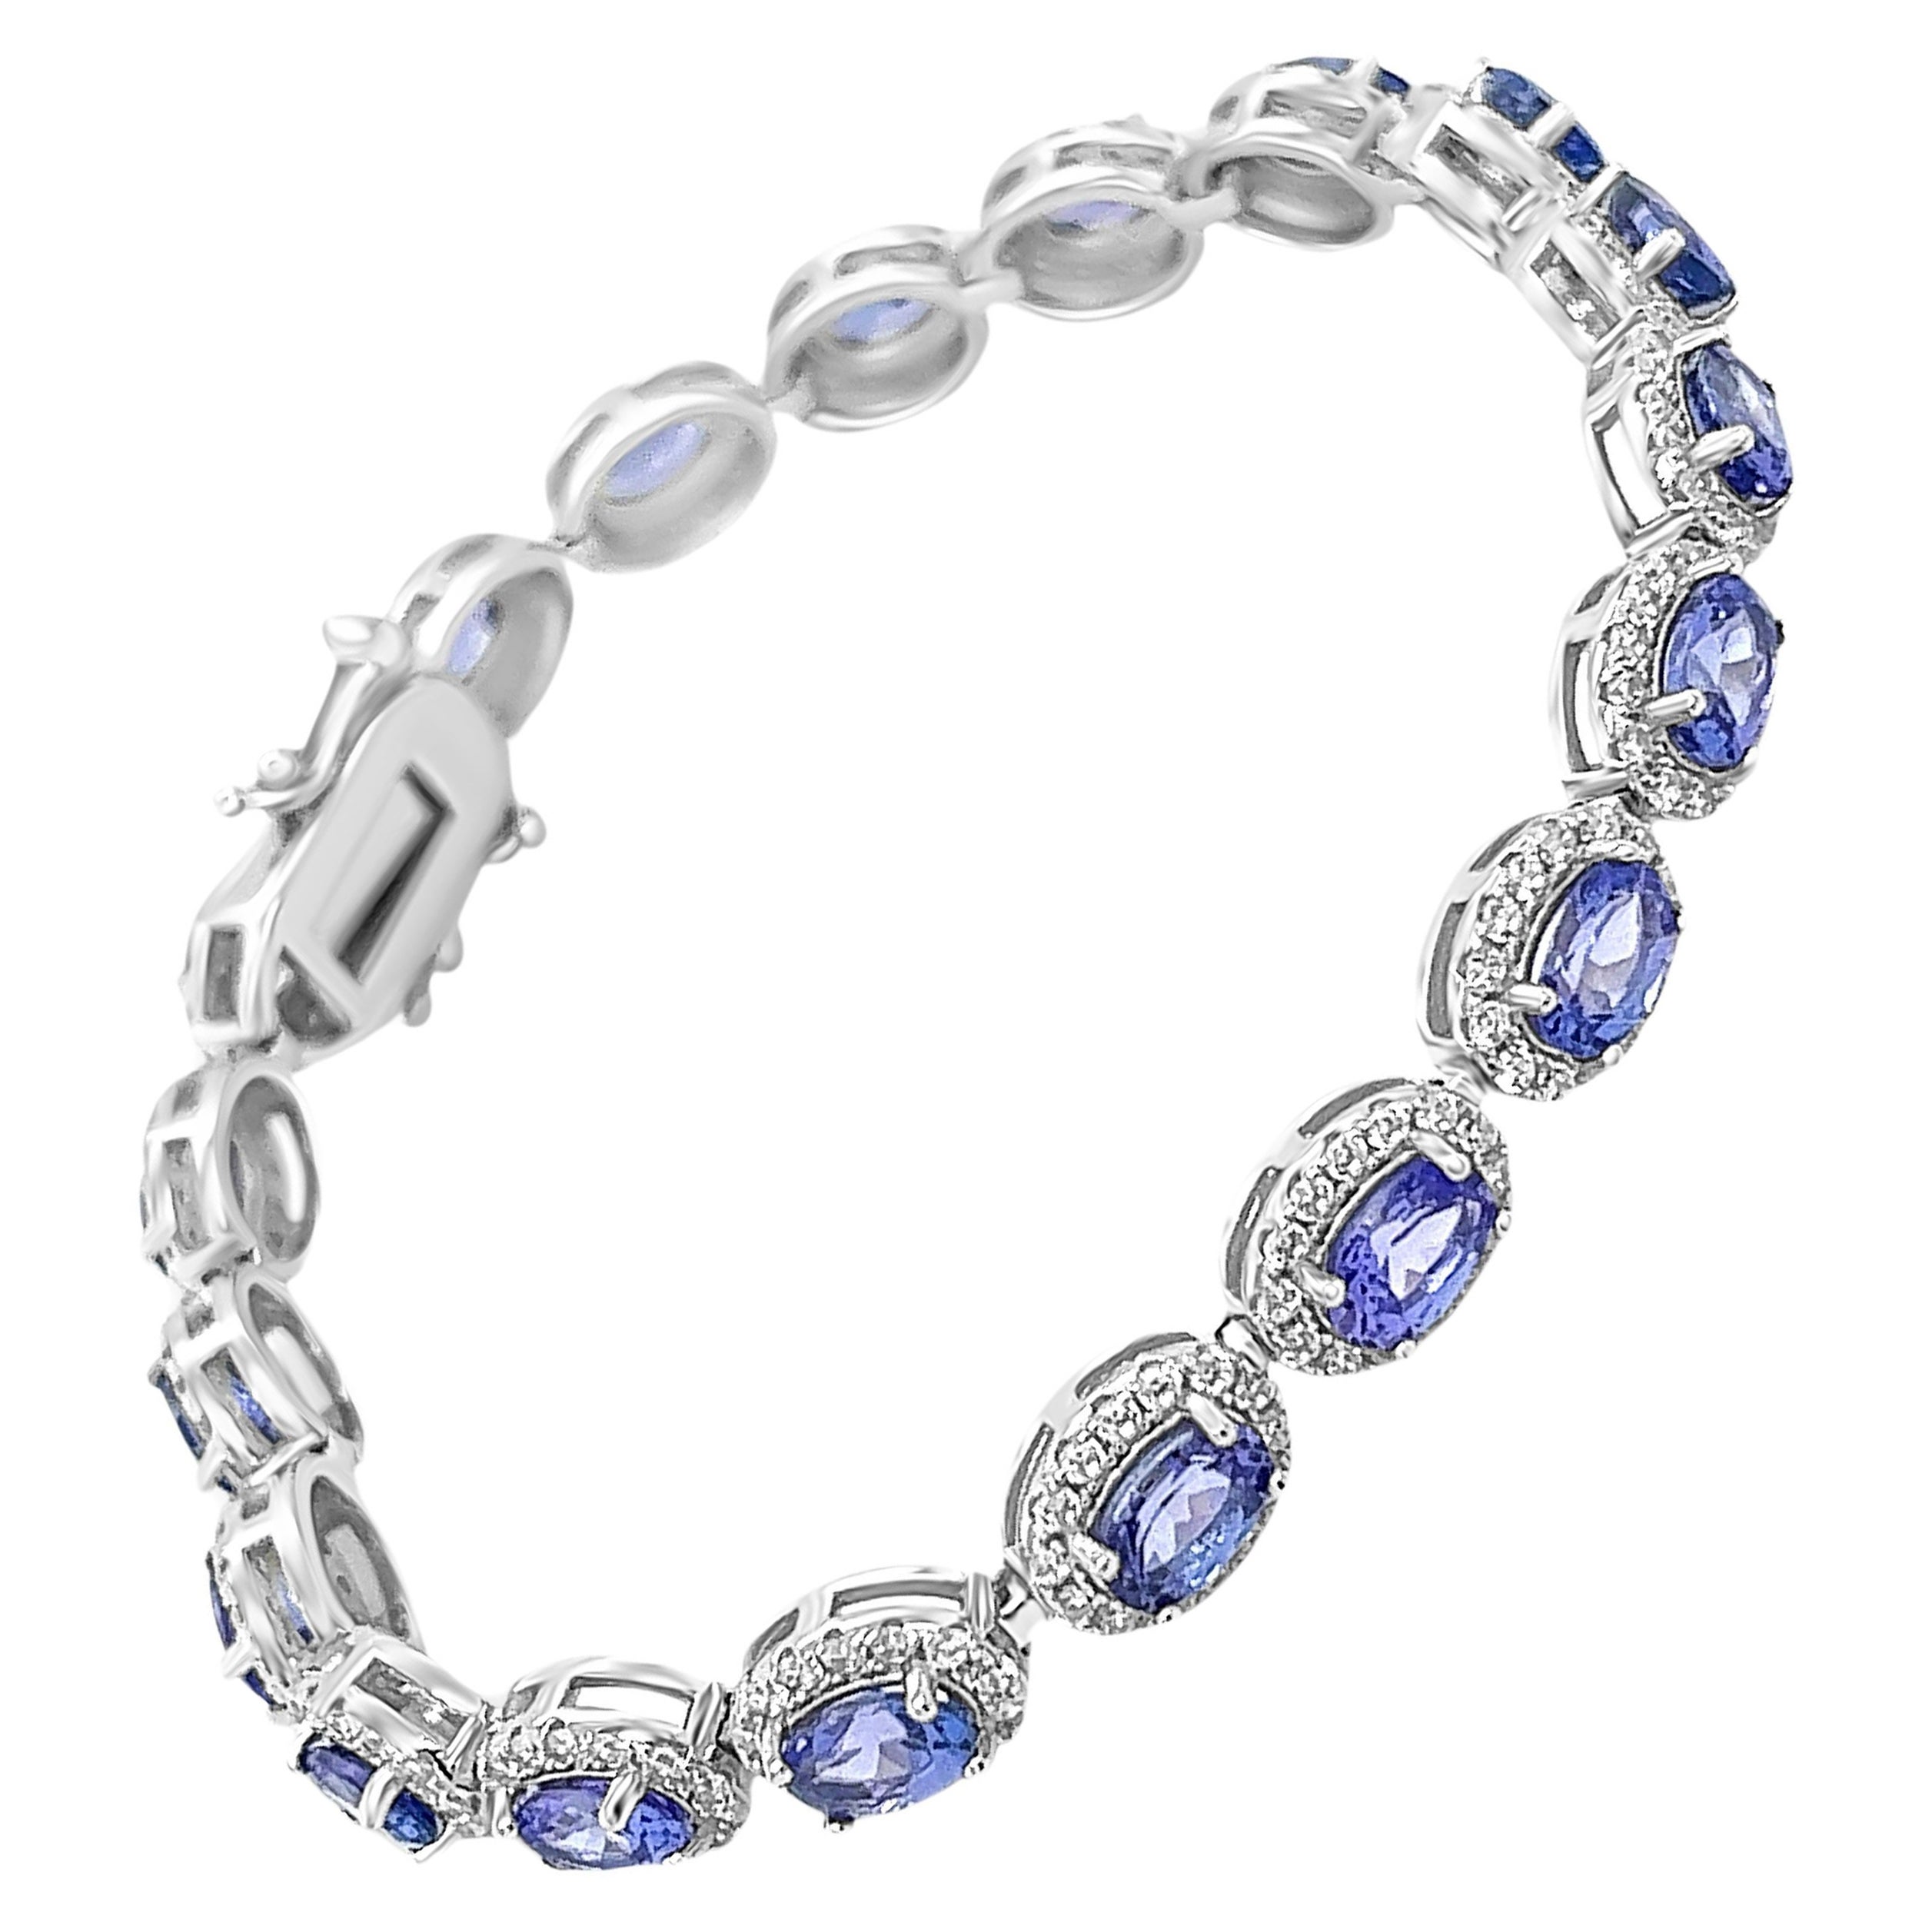 19.23 Carats Tanzanite Tennis Bracelet Oval Cut Sterling Silver Bridal Jewelry  For Sale